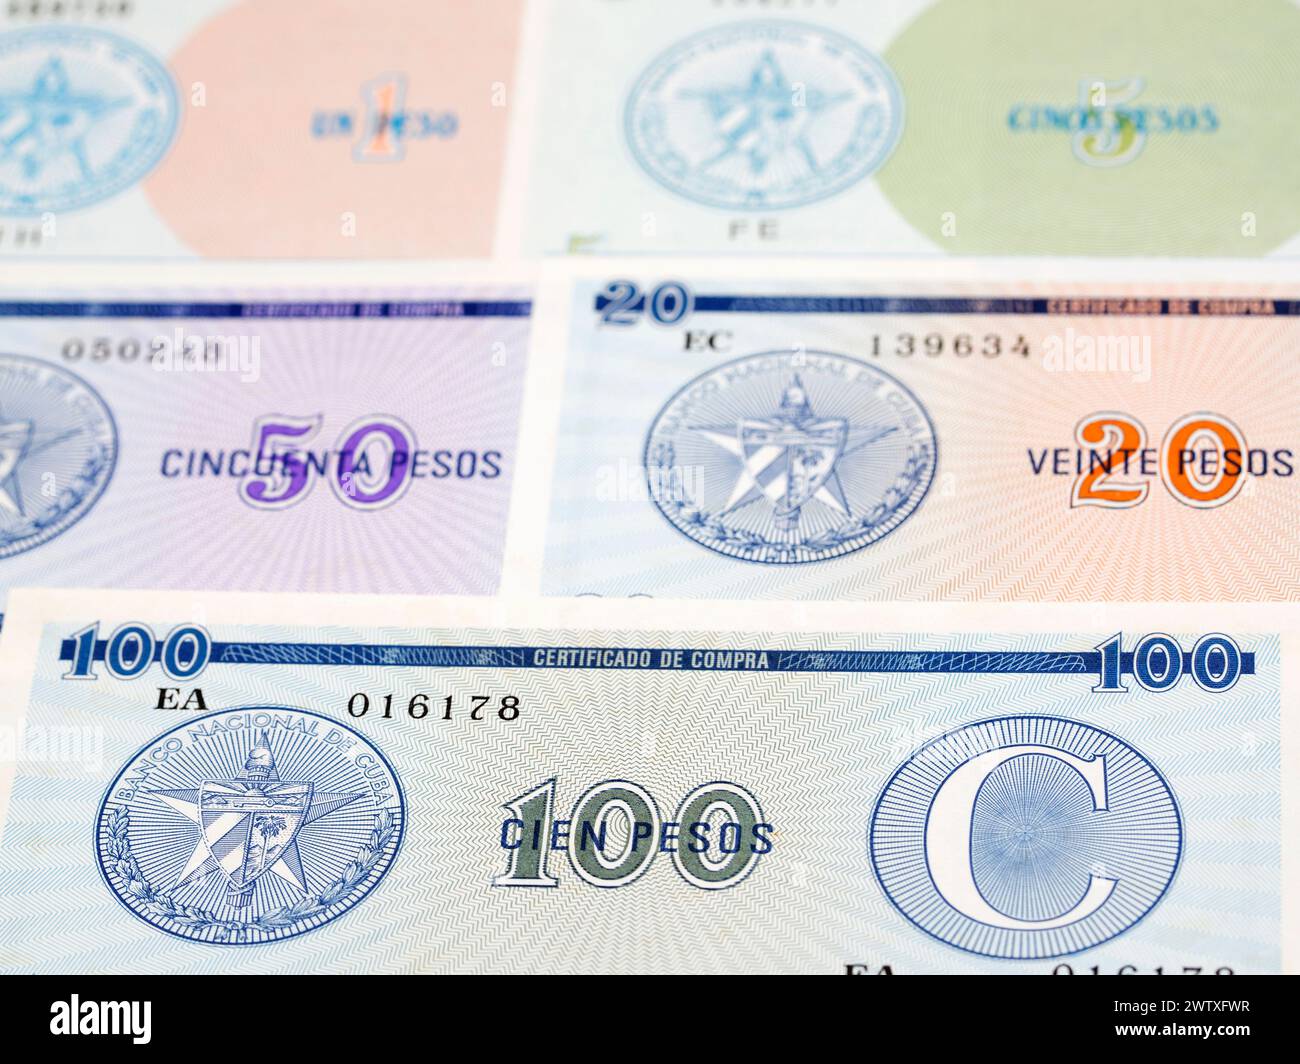 Cuban money - Peso - Foreign Exchange Certificate a business background Stock Photo